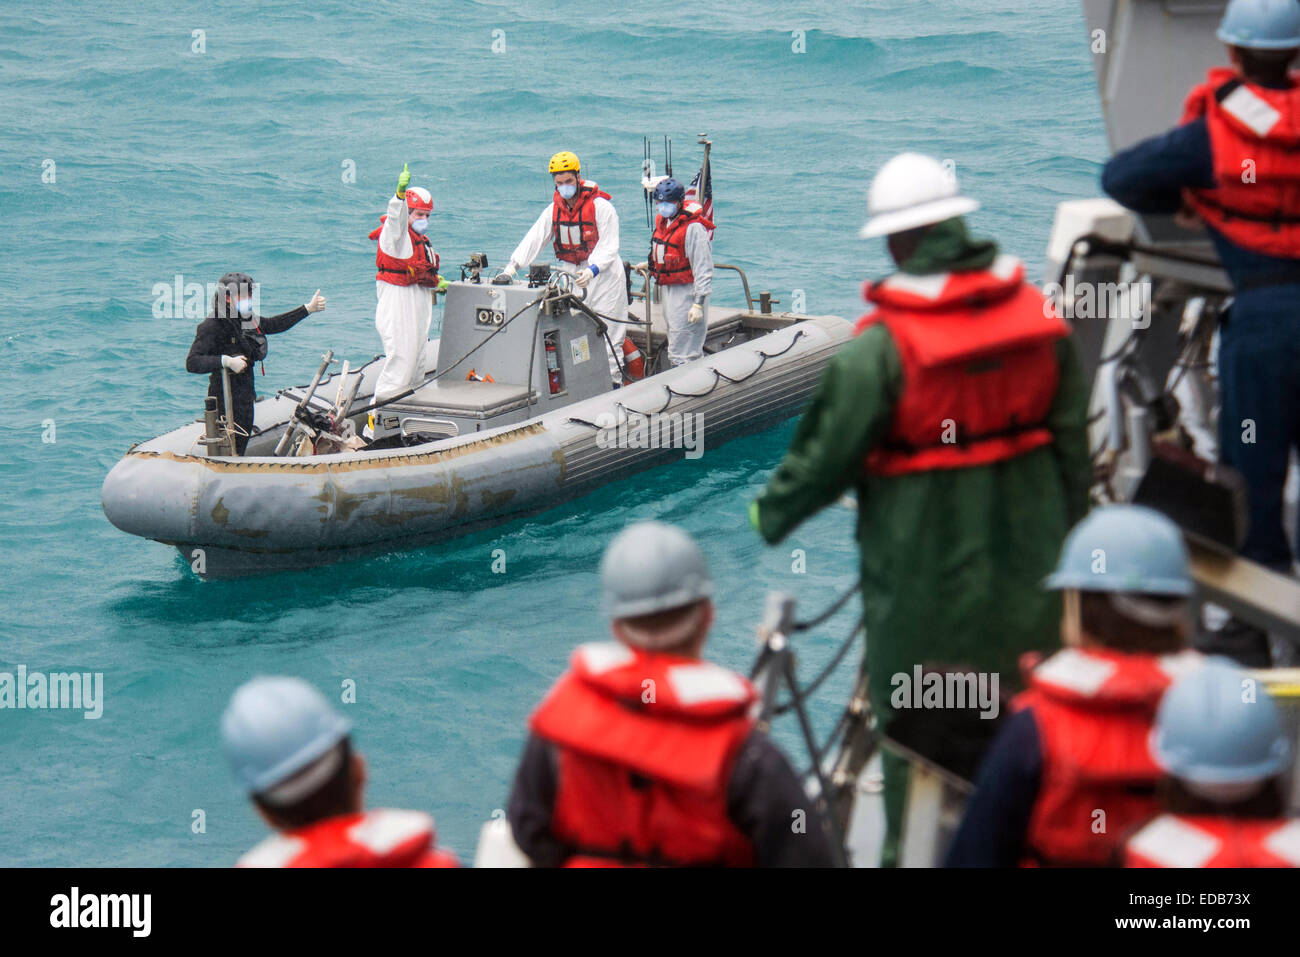 US Navy sailors from the from the Arleigh Burke-class destroyer USS Sampson during search and recovery operations to assist in locating the missing AirAsia Flight QZ 8501 January 4, 2015 in the Java Sea. Stock Photo